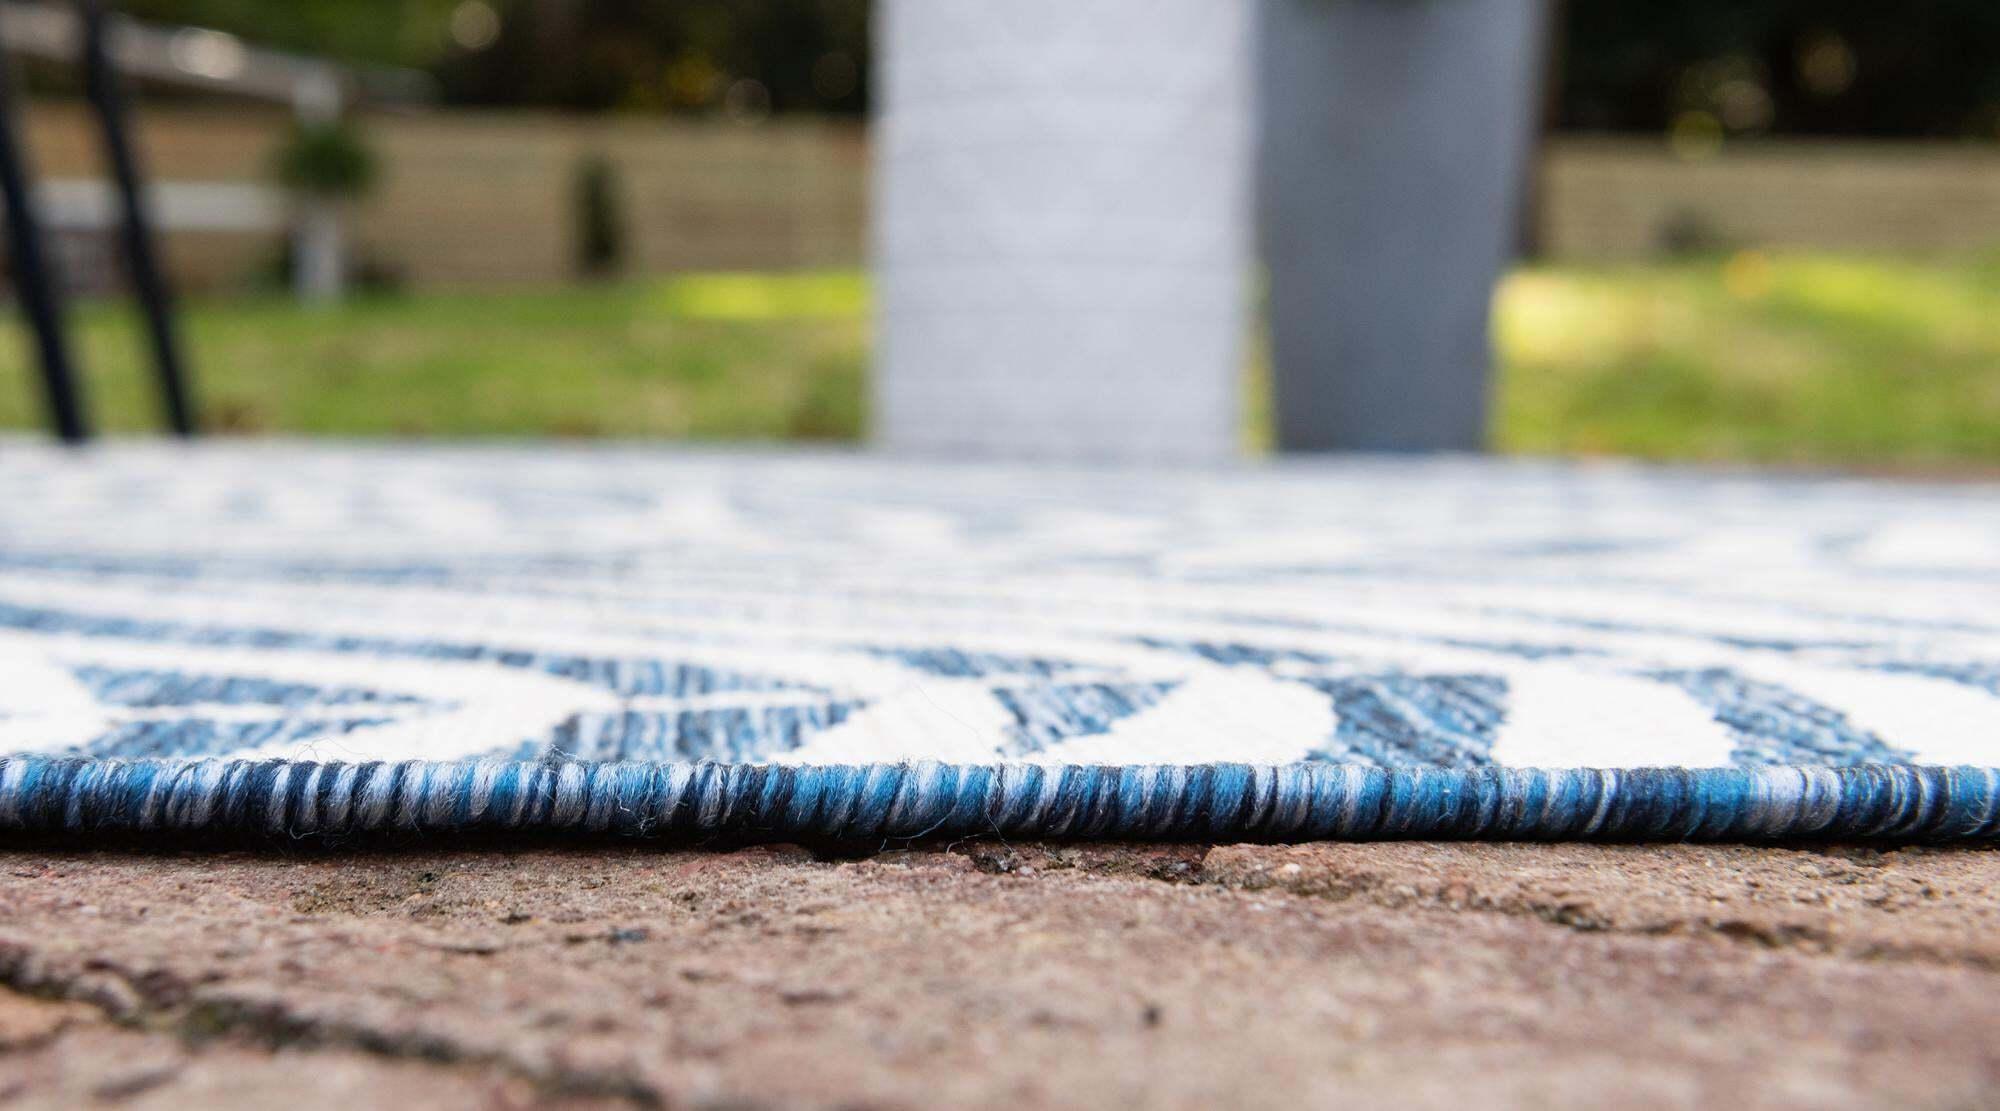 Unique Loom Outdoor Rugs - Outdoor Botanical Floral / Botanical 4x6 Rug Navy Blue & Ivory